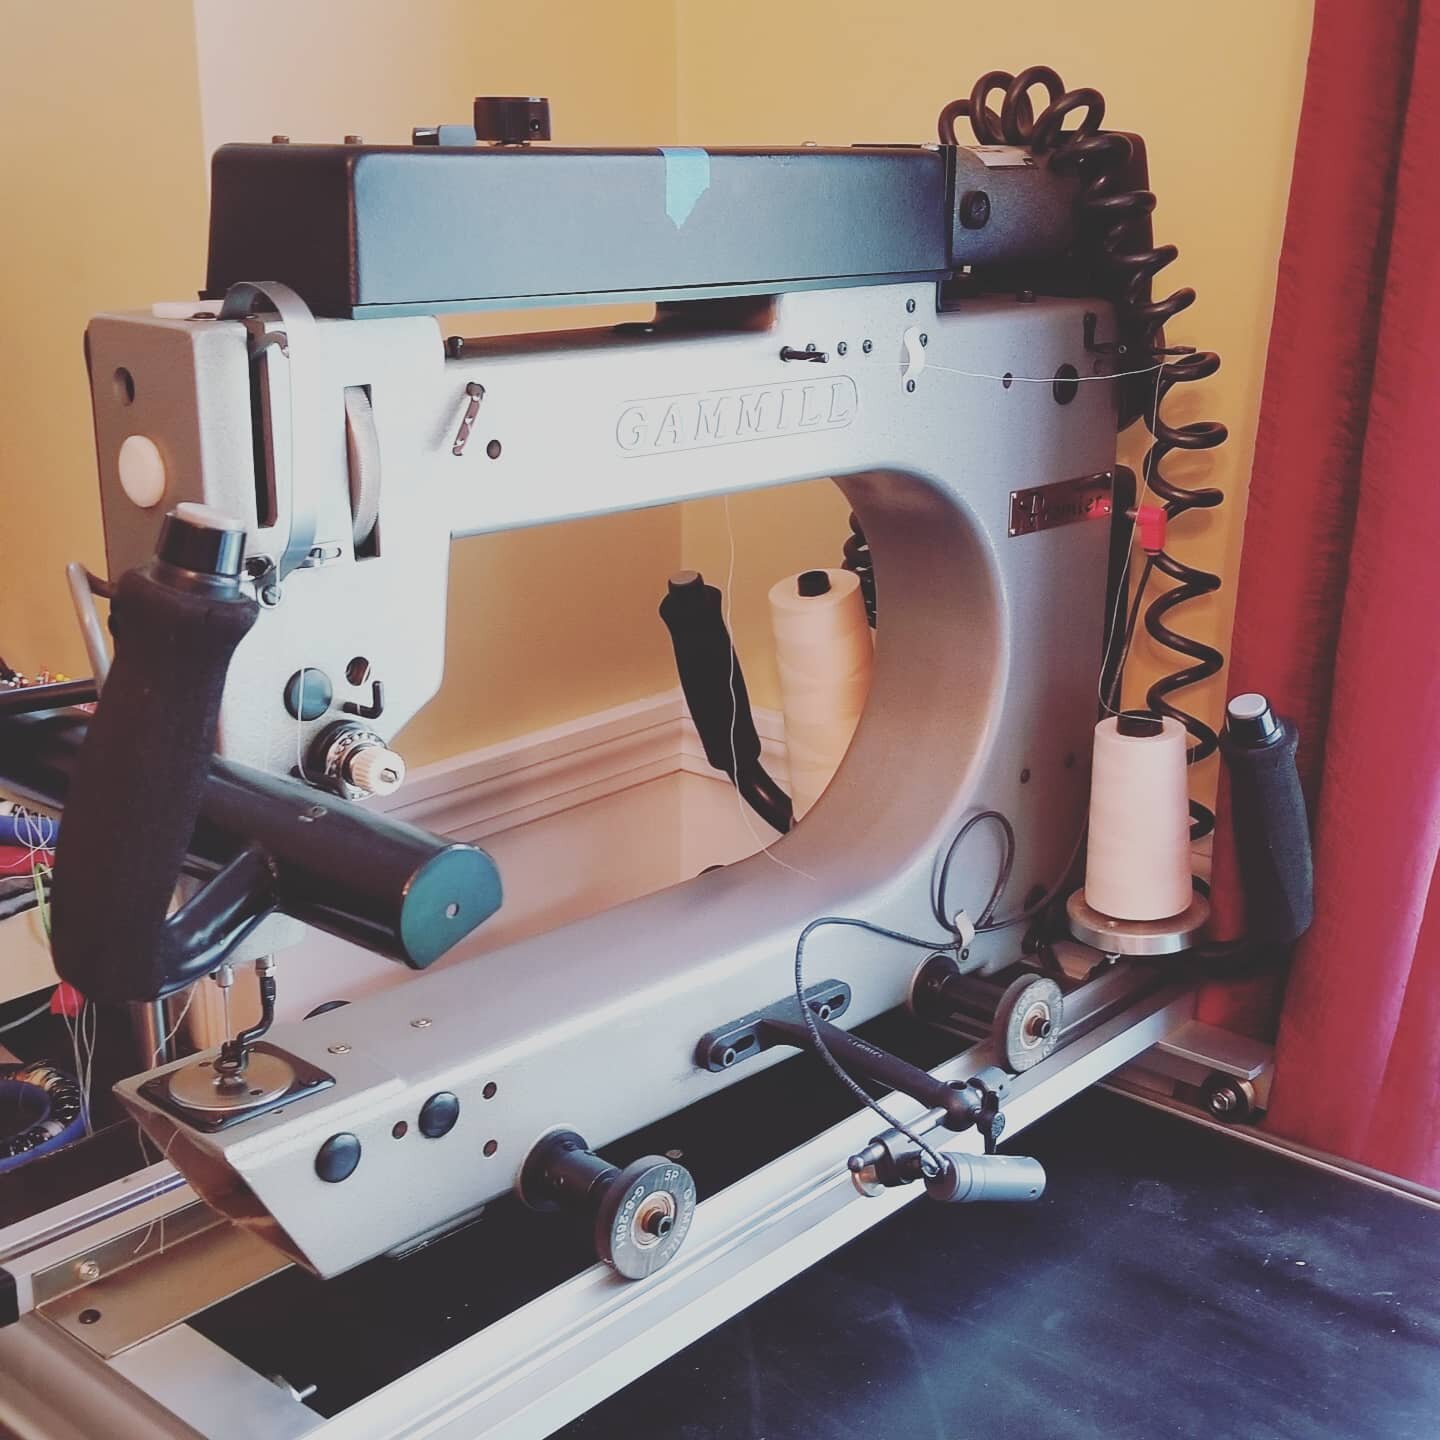 Giant sewing machine is out of storage and ready to quilt soon!!!!!